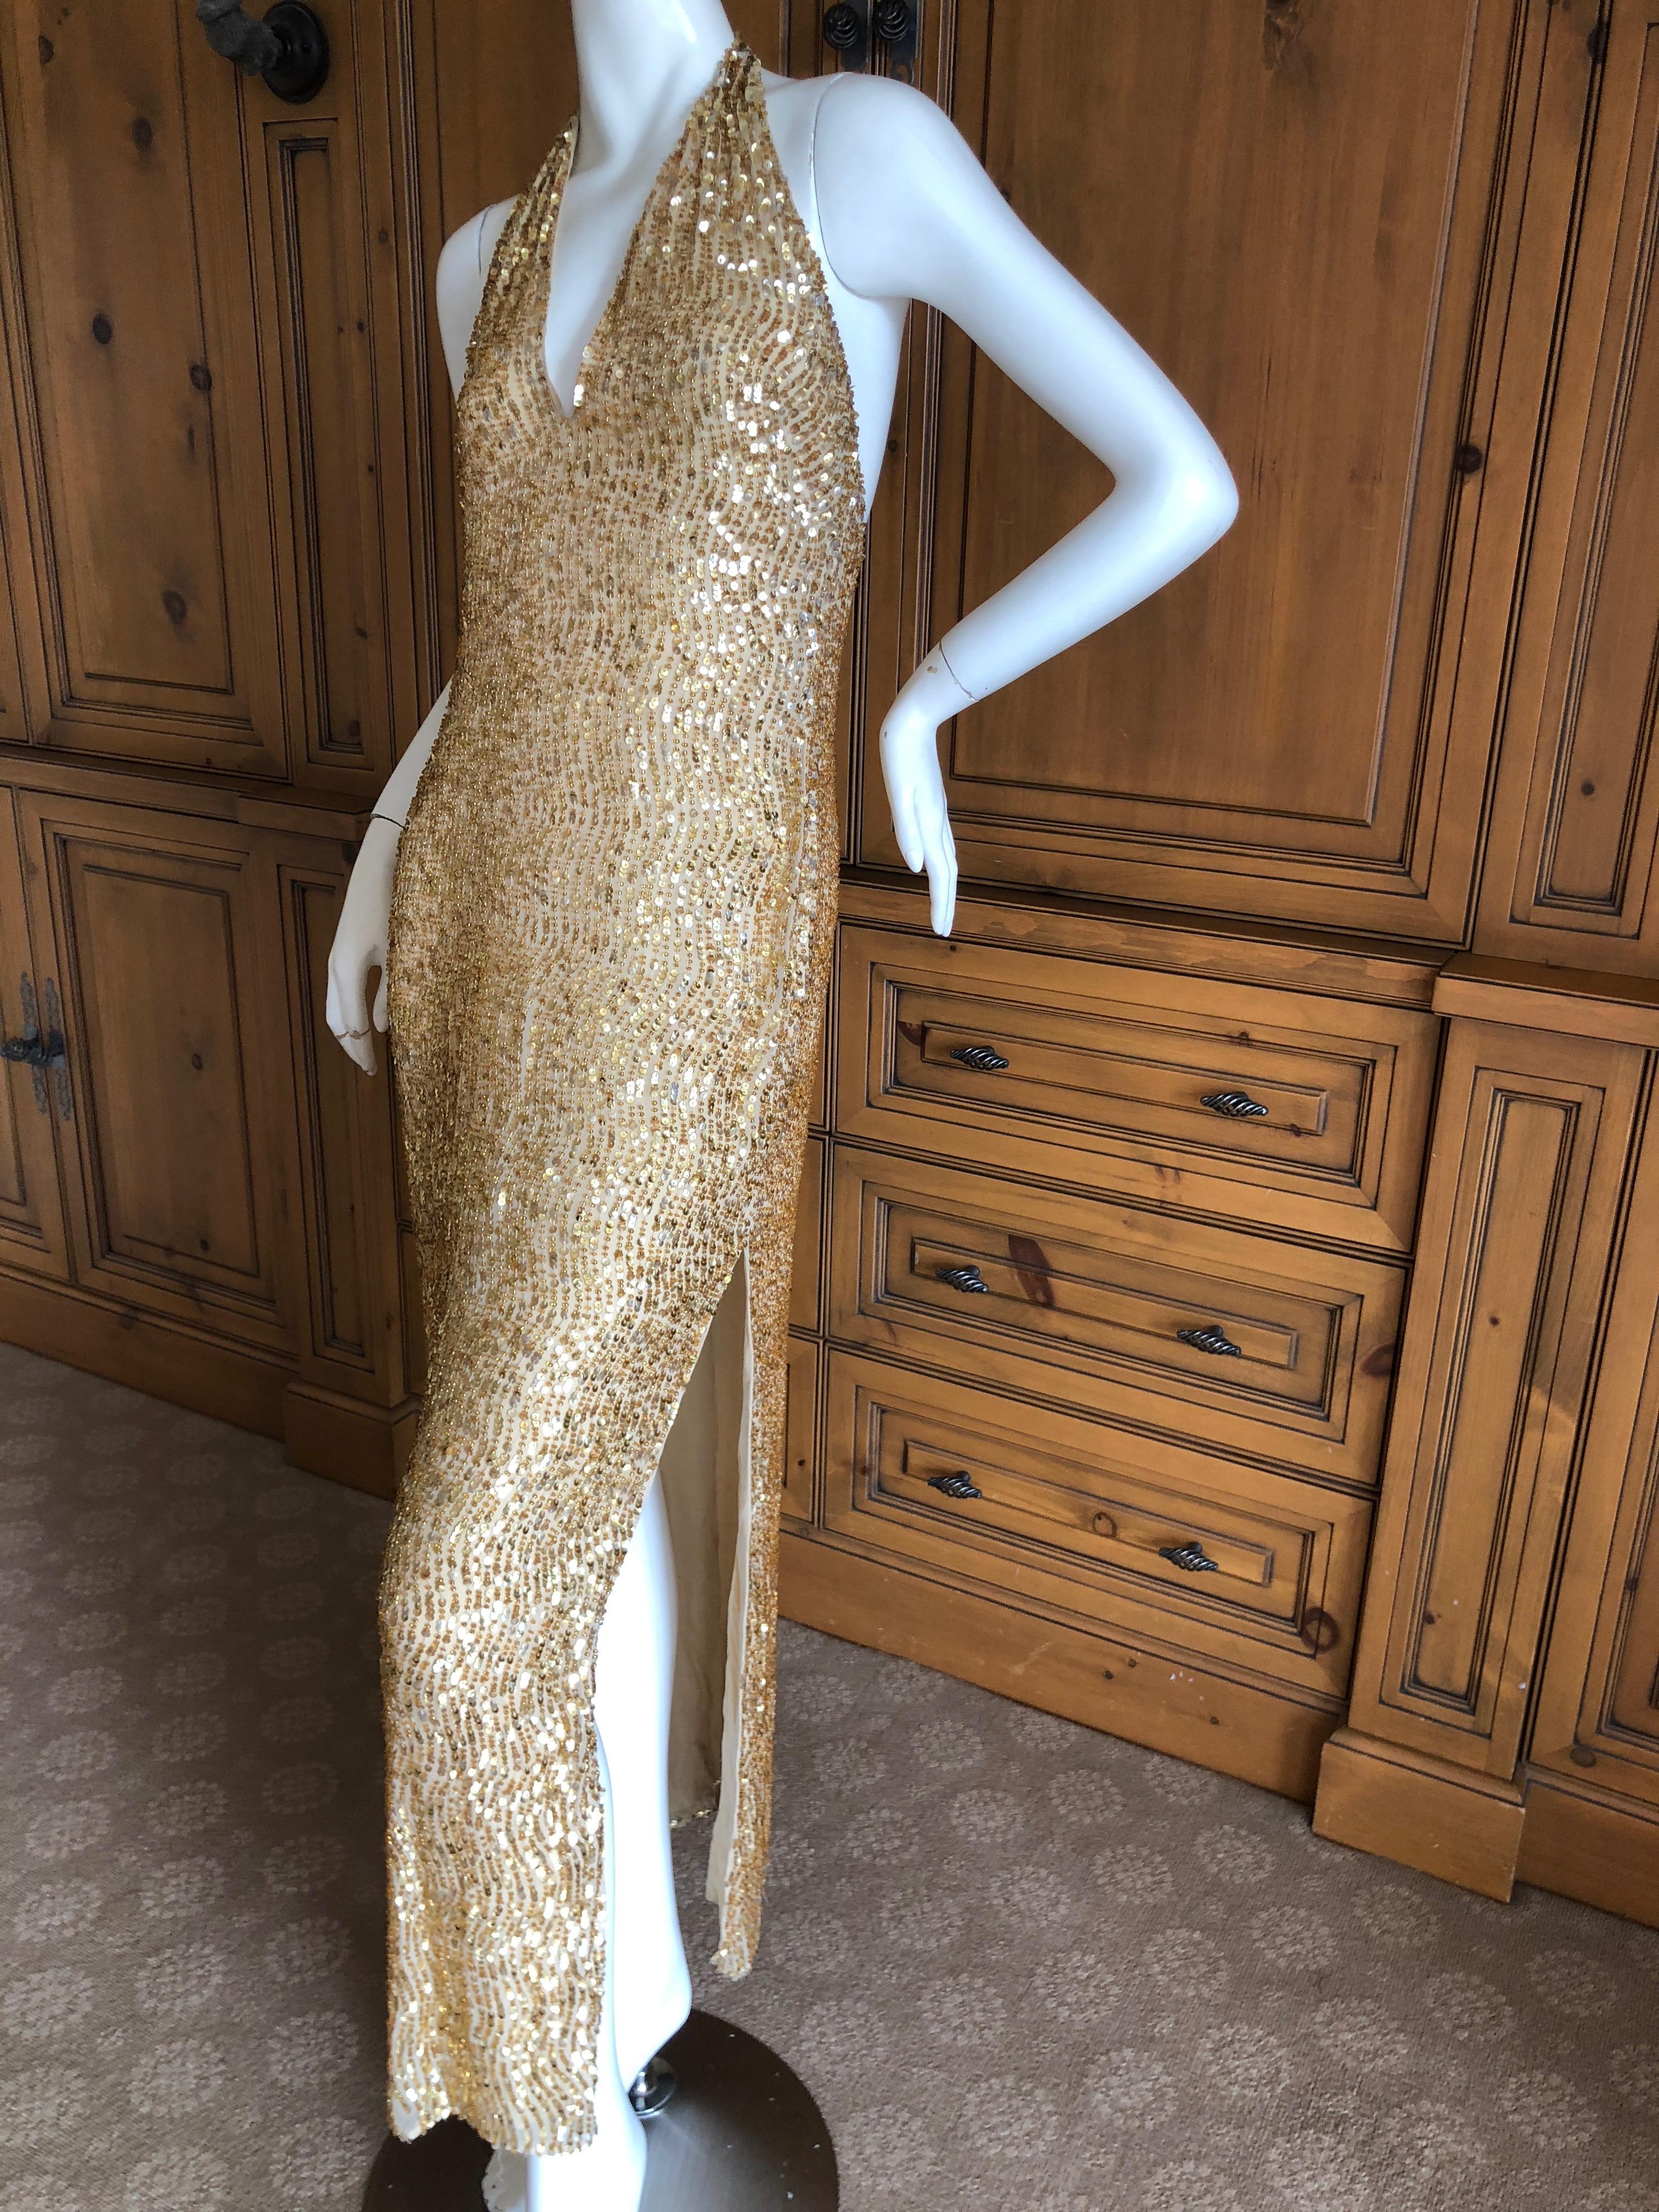 Halston by Randolph Duke 1999 Gold Sequin Halter Style Evening Gown.
This is so much prettier than the photos show, and needs to be seen in motion, preferably under the disco ball.
Featuring a halter neckline and a high slit, this is so